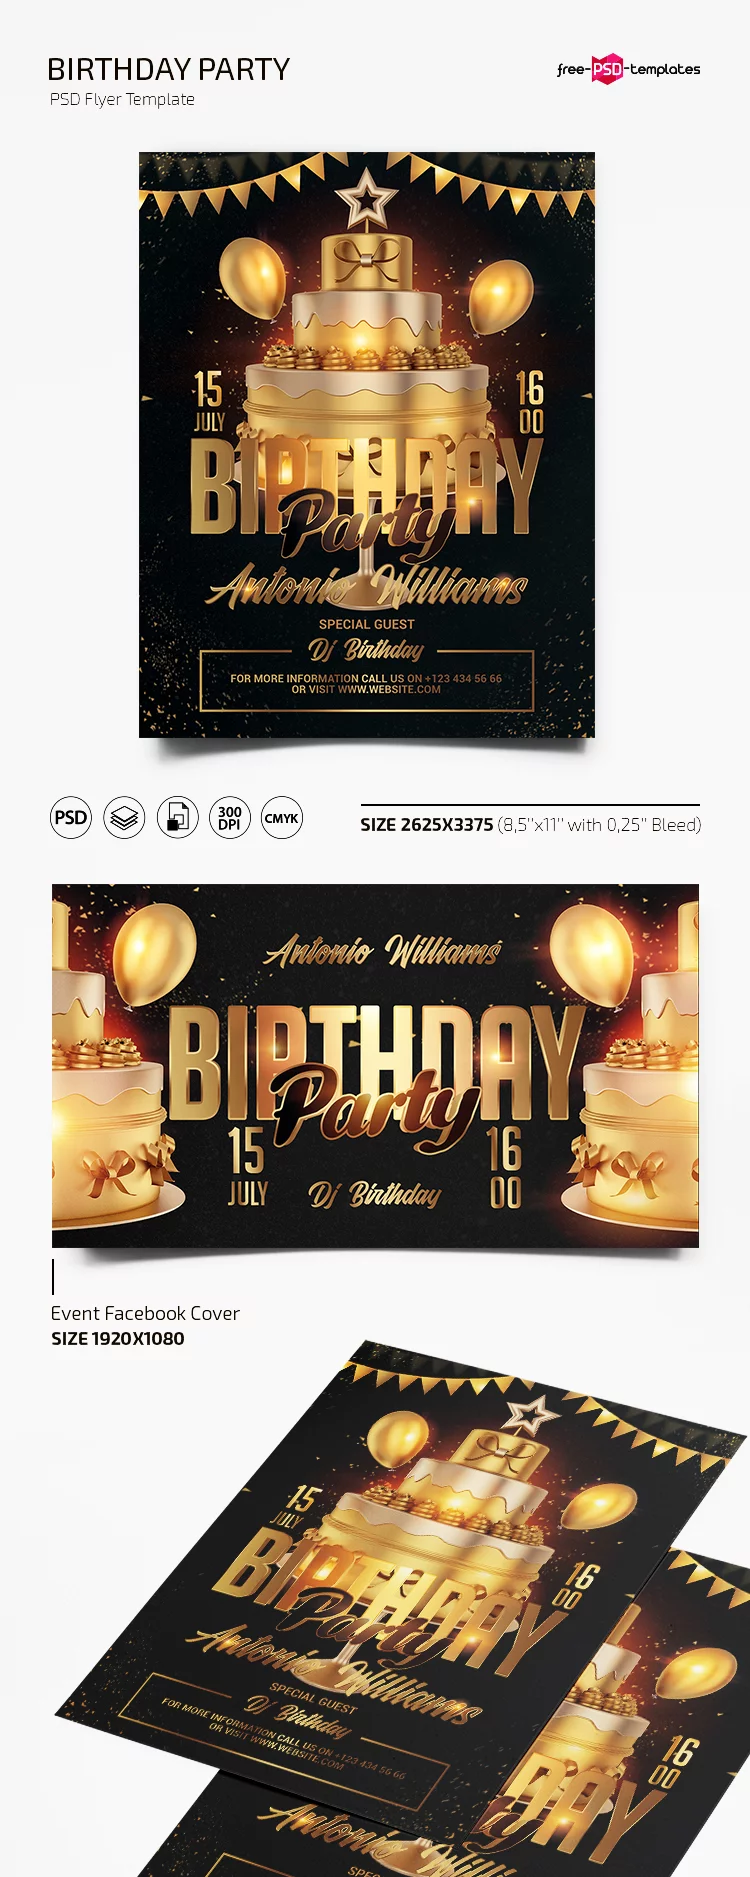 Free Birthday Party Flyer Template in PSD